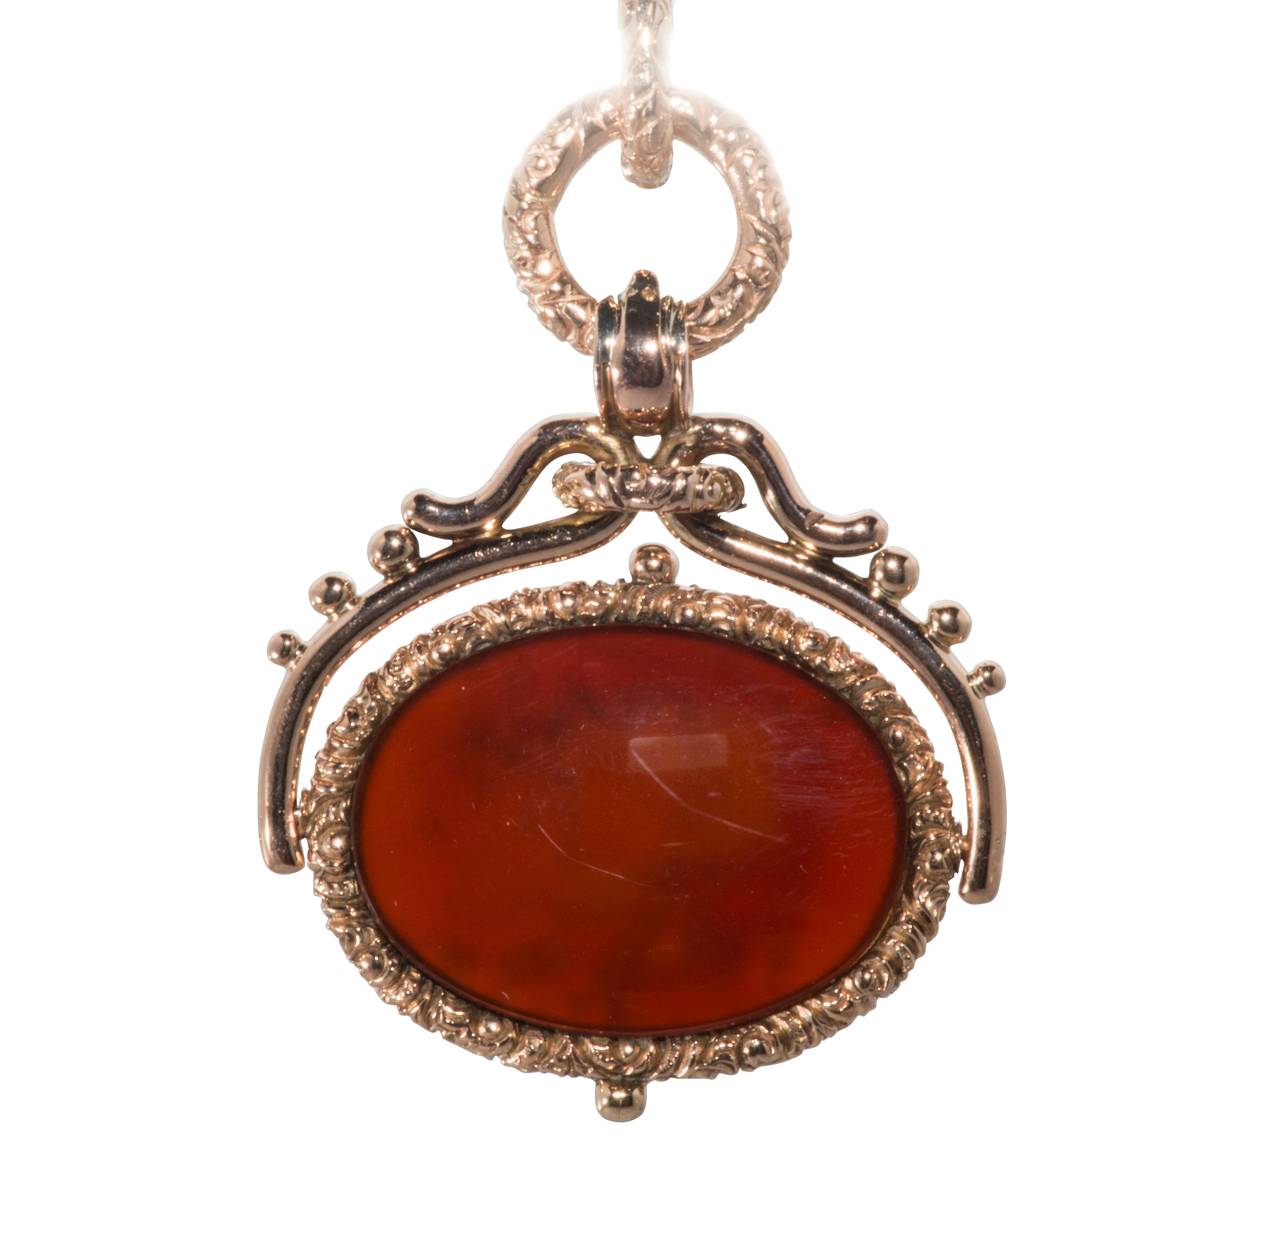 This is a very pretty and interesting piece.  It is Etruscan Revival style from the Victorian era.  It is an intricately carved intaglio and is set in rose gold. It was originally a watch fob that has been converted into a pendant.